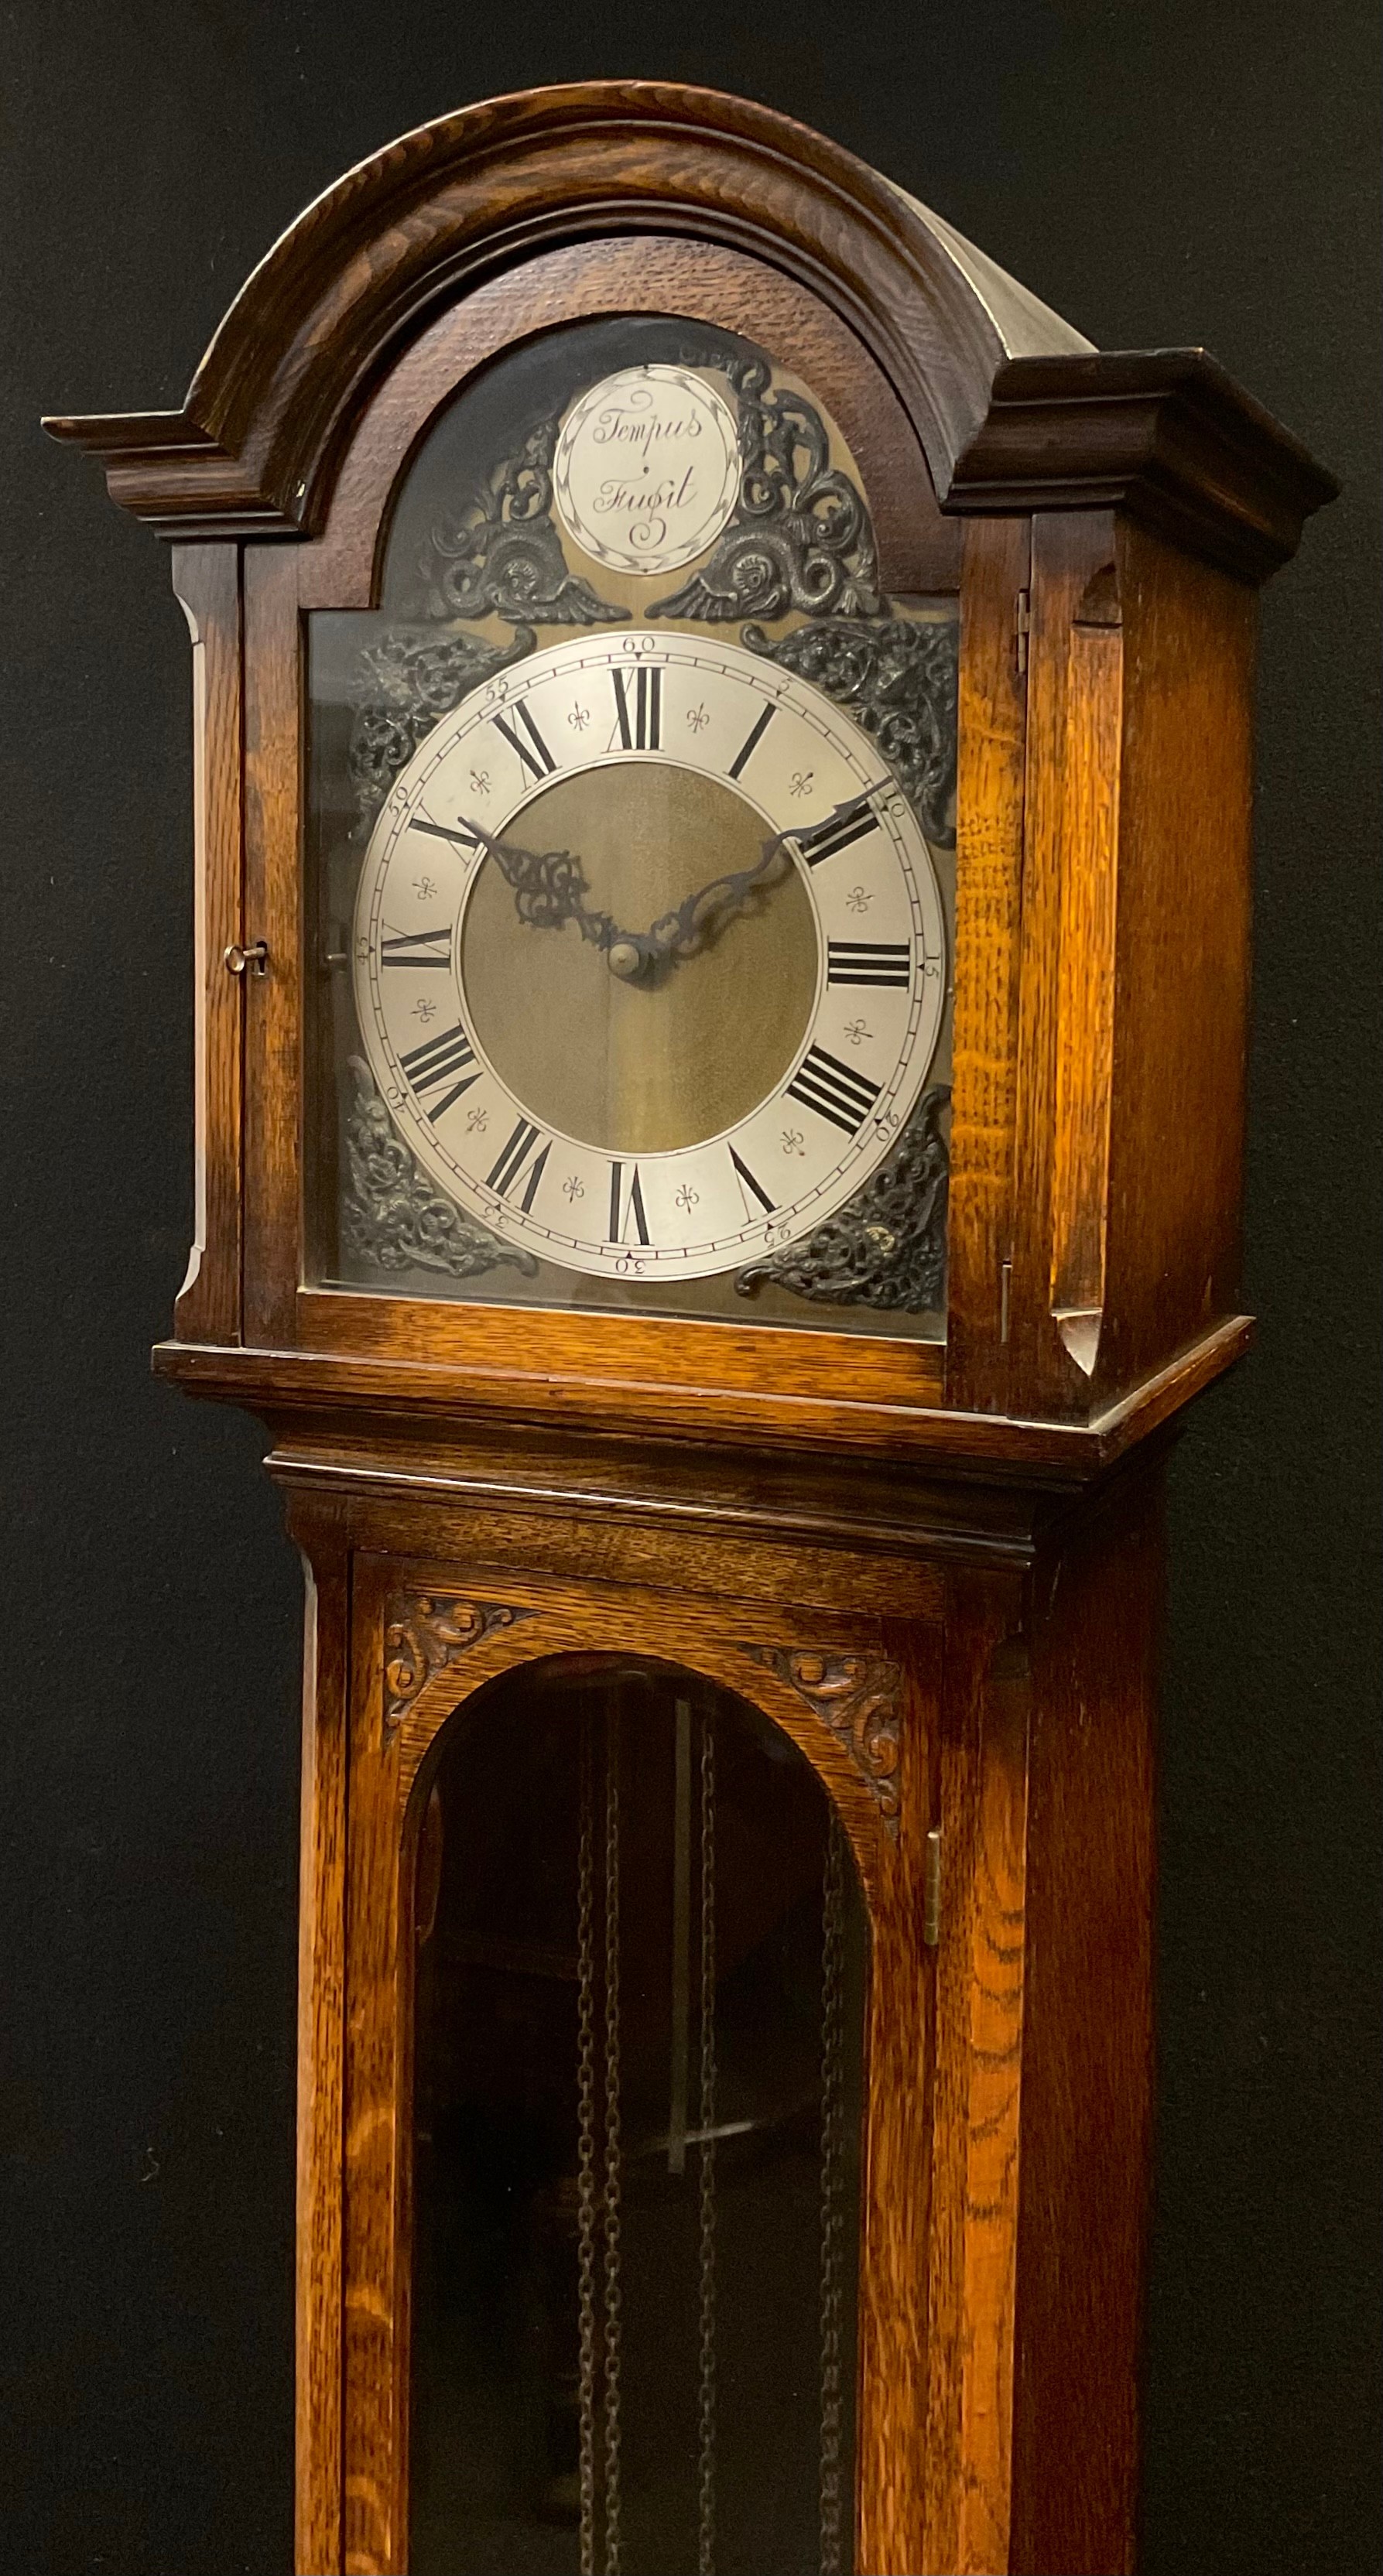 A George III style oak Longcase clock, Embee quarter-chiming, triple weight, 8 Day Westminster - Image 2 of 3